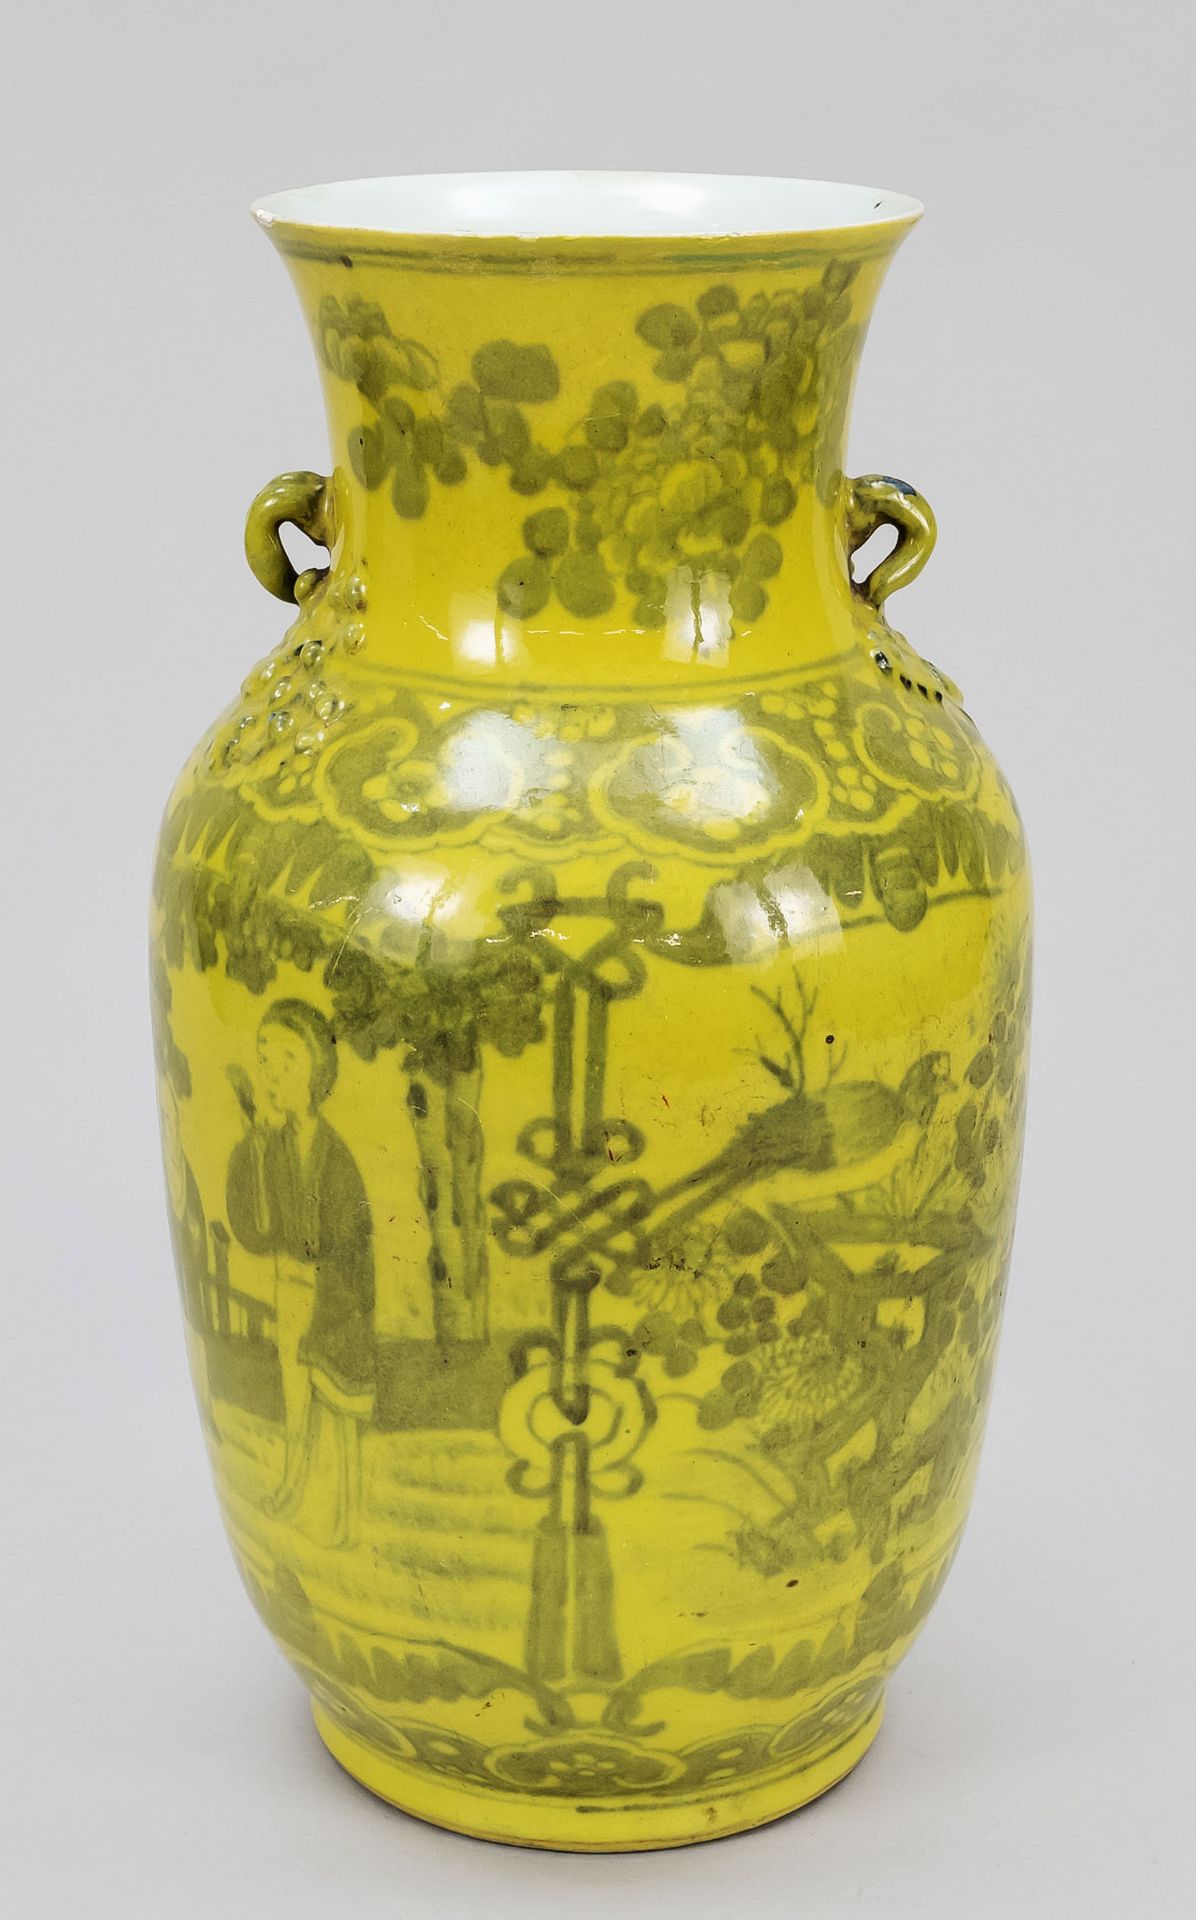 Canary bird vase, China, Qing dynasty(1644-1911), 18th/19th century, cobalt blue painted porcelain